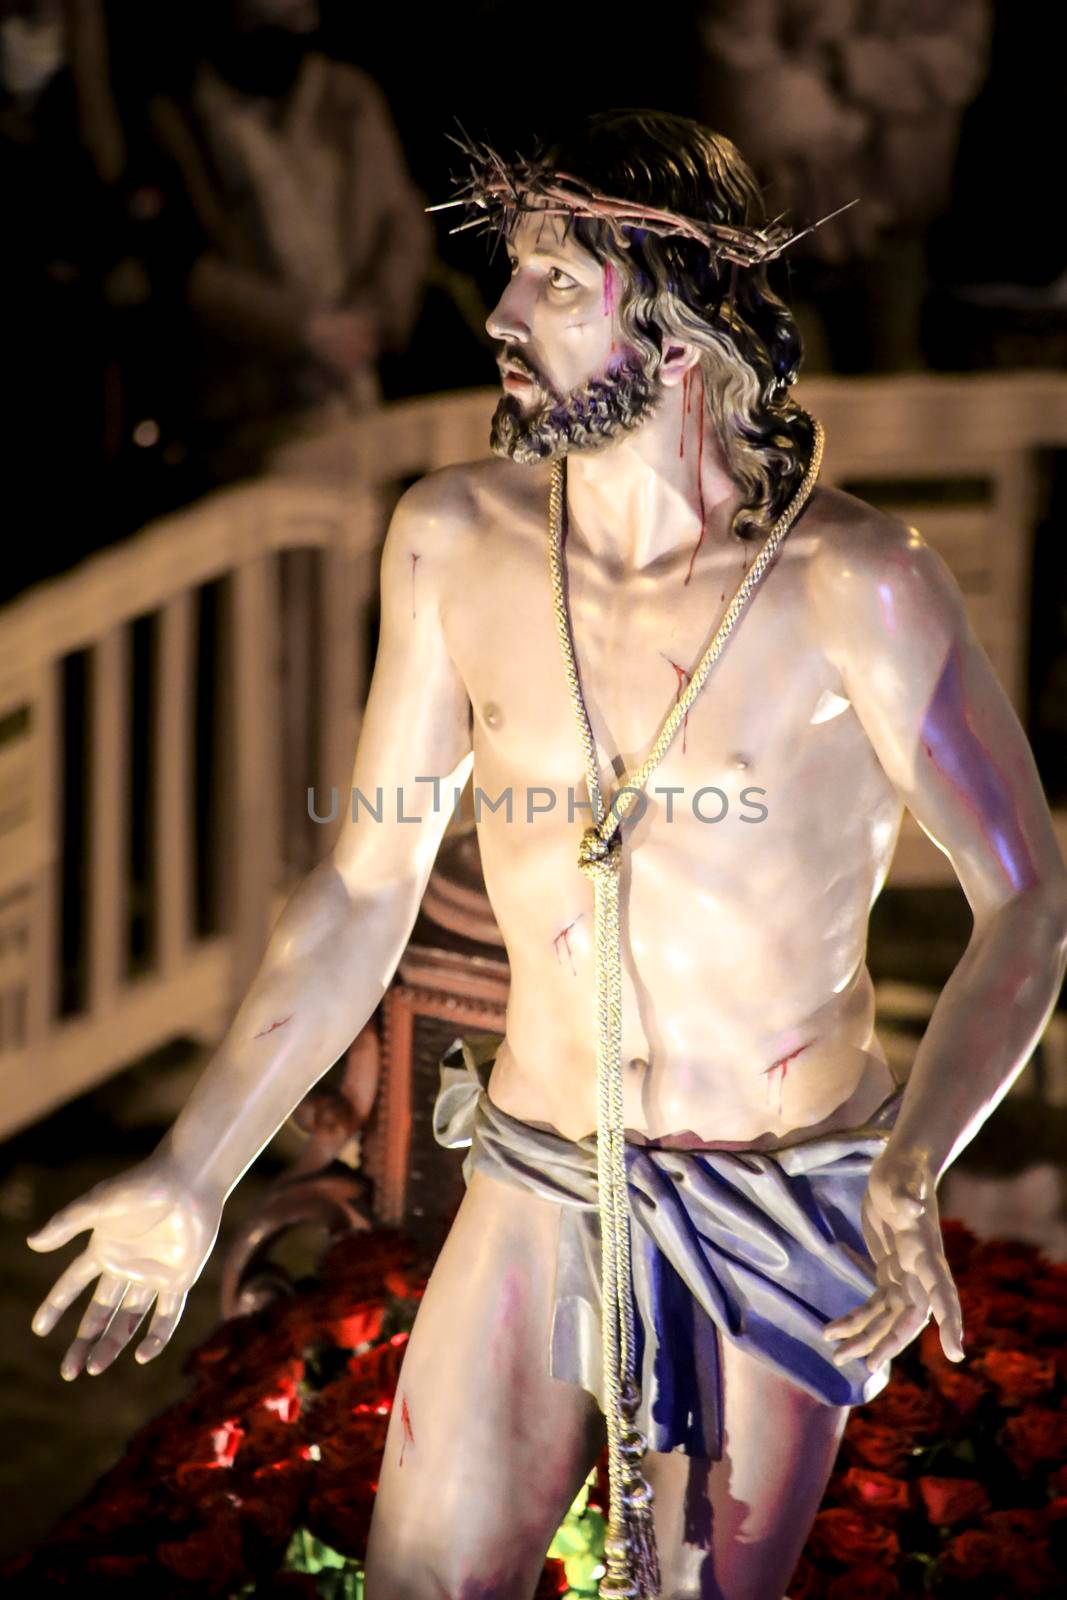 Christ in procession of Holy Week in Elche, Spain by soniabonet